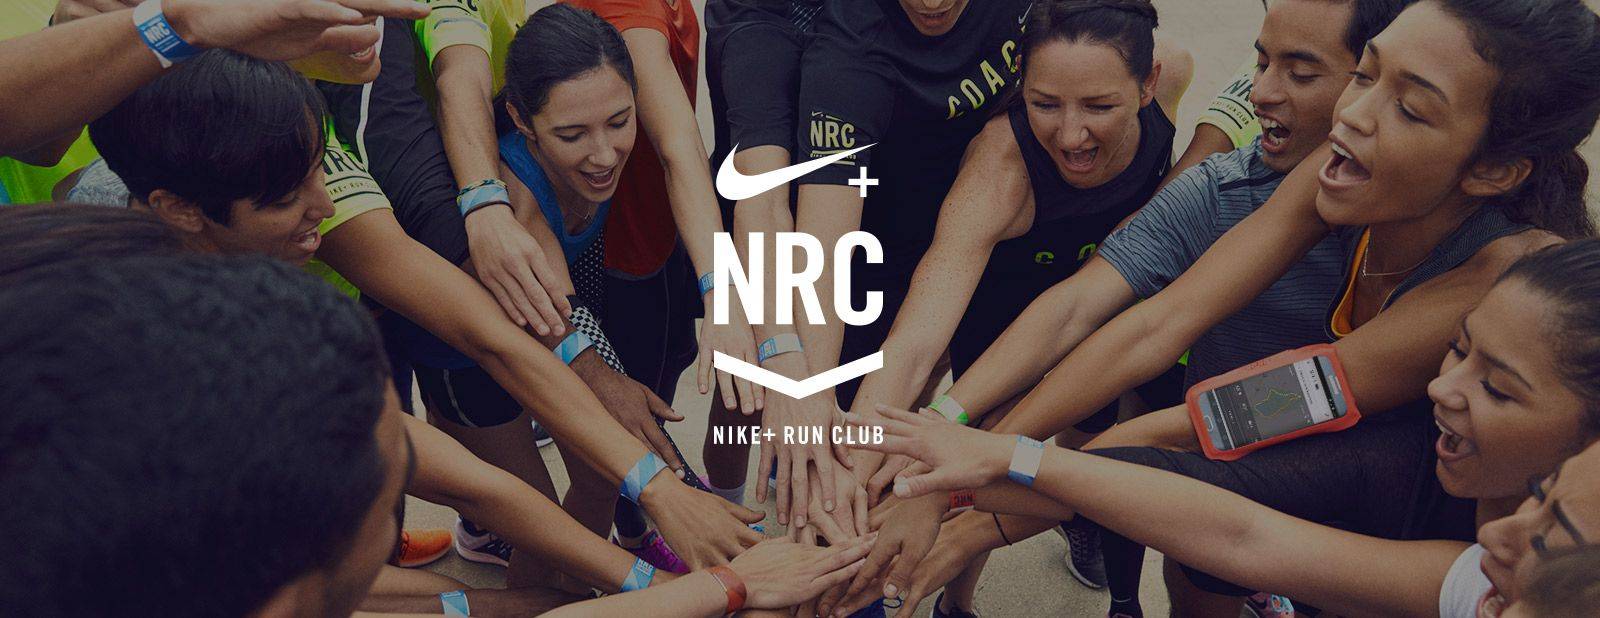 stil leveren Of anders Nike renames running app to Nike+ Run Club, adds new features - Android  Community